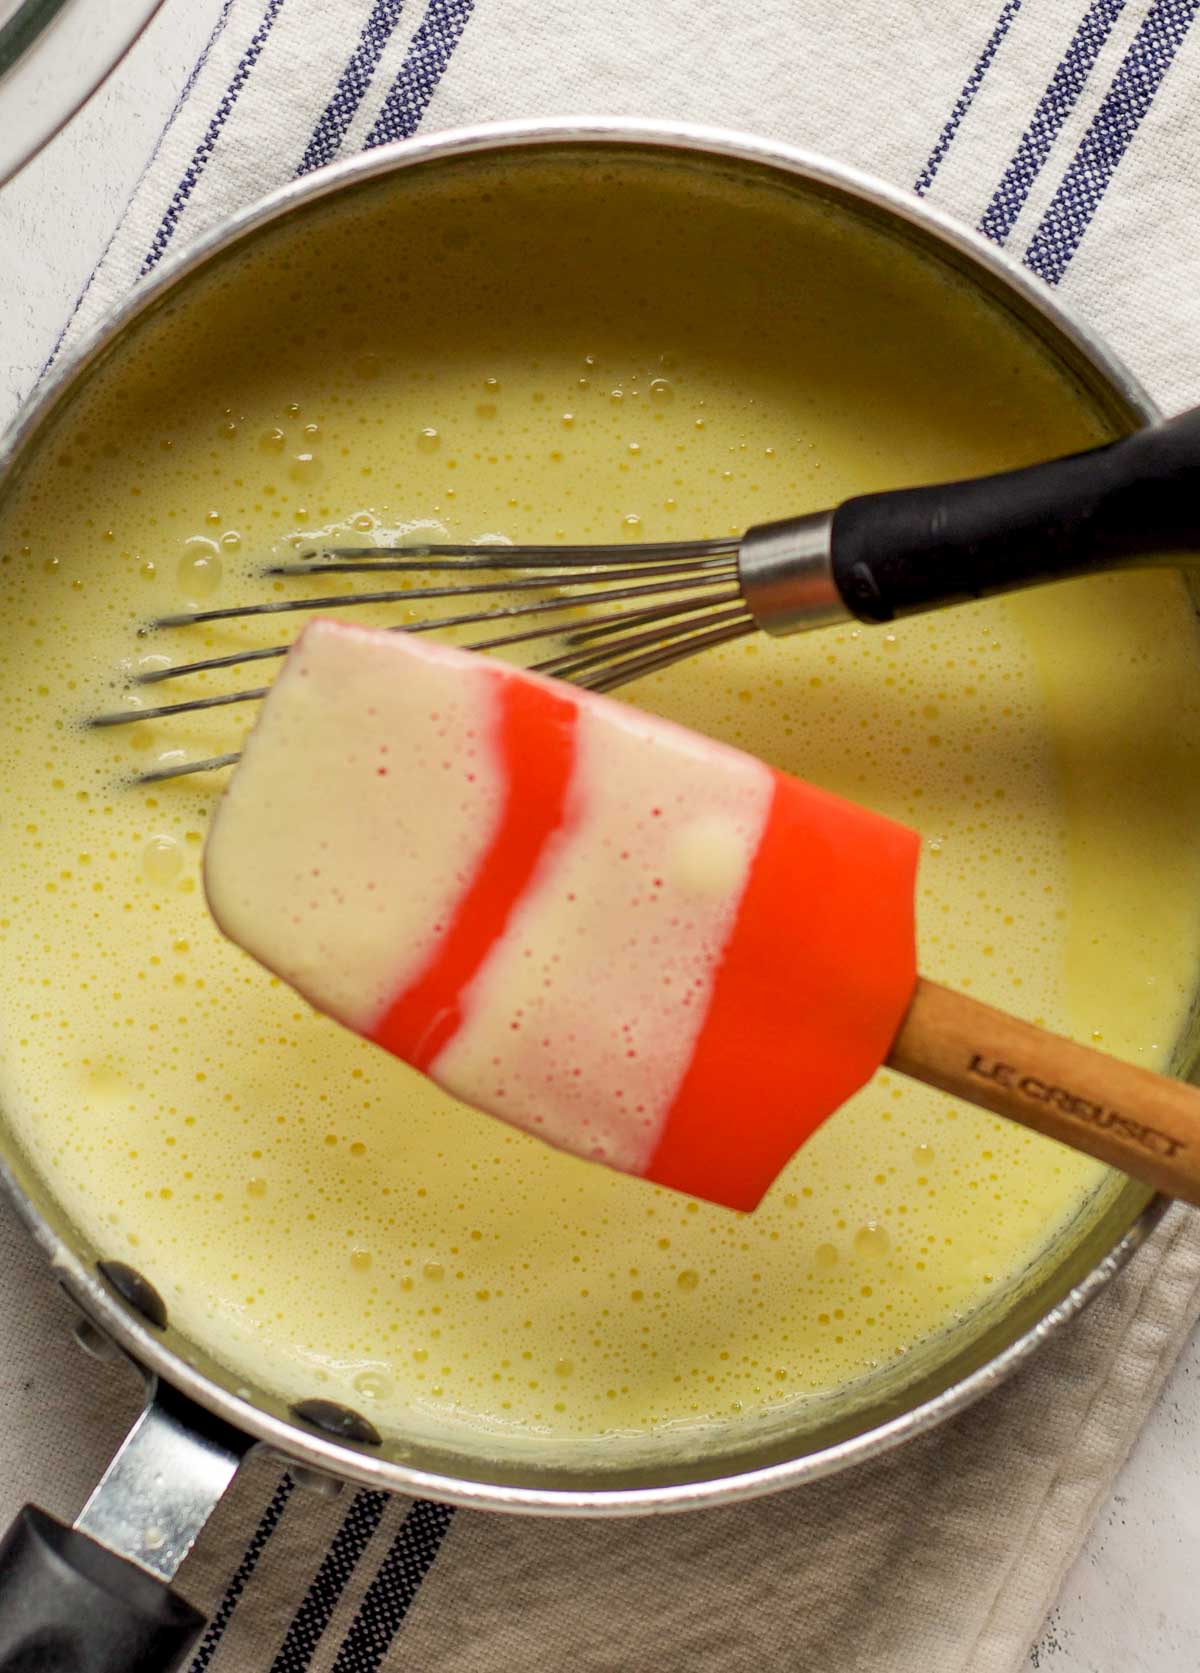 A spatula with custard on it to show thickness.